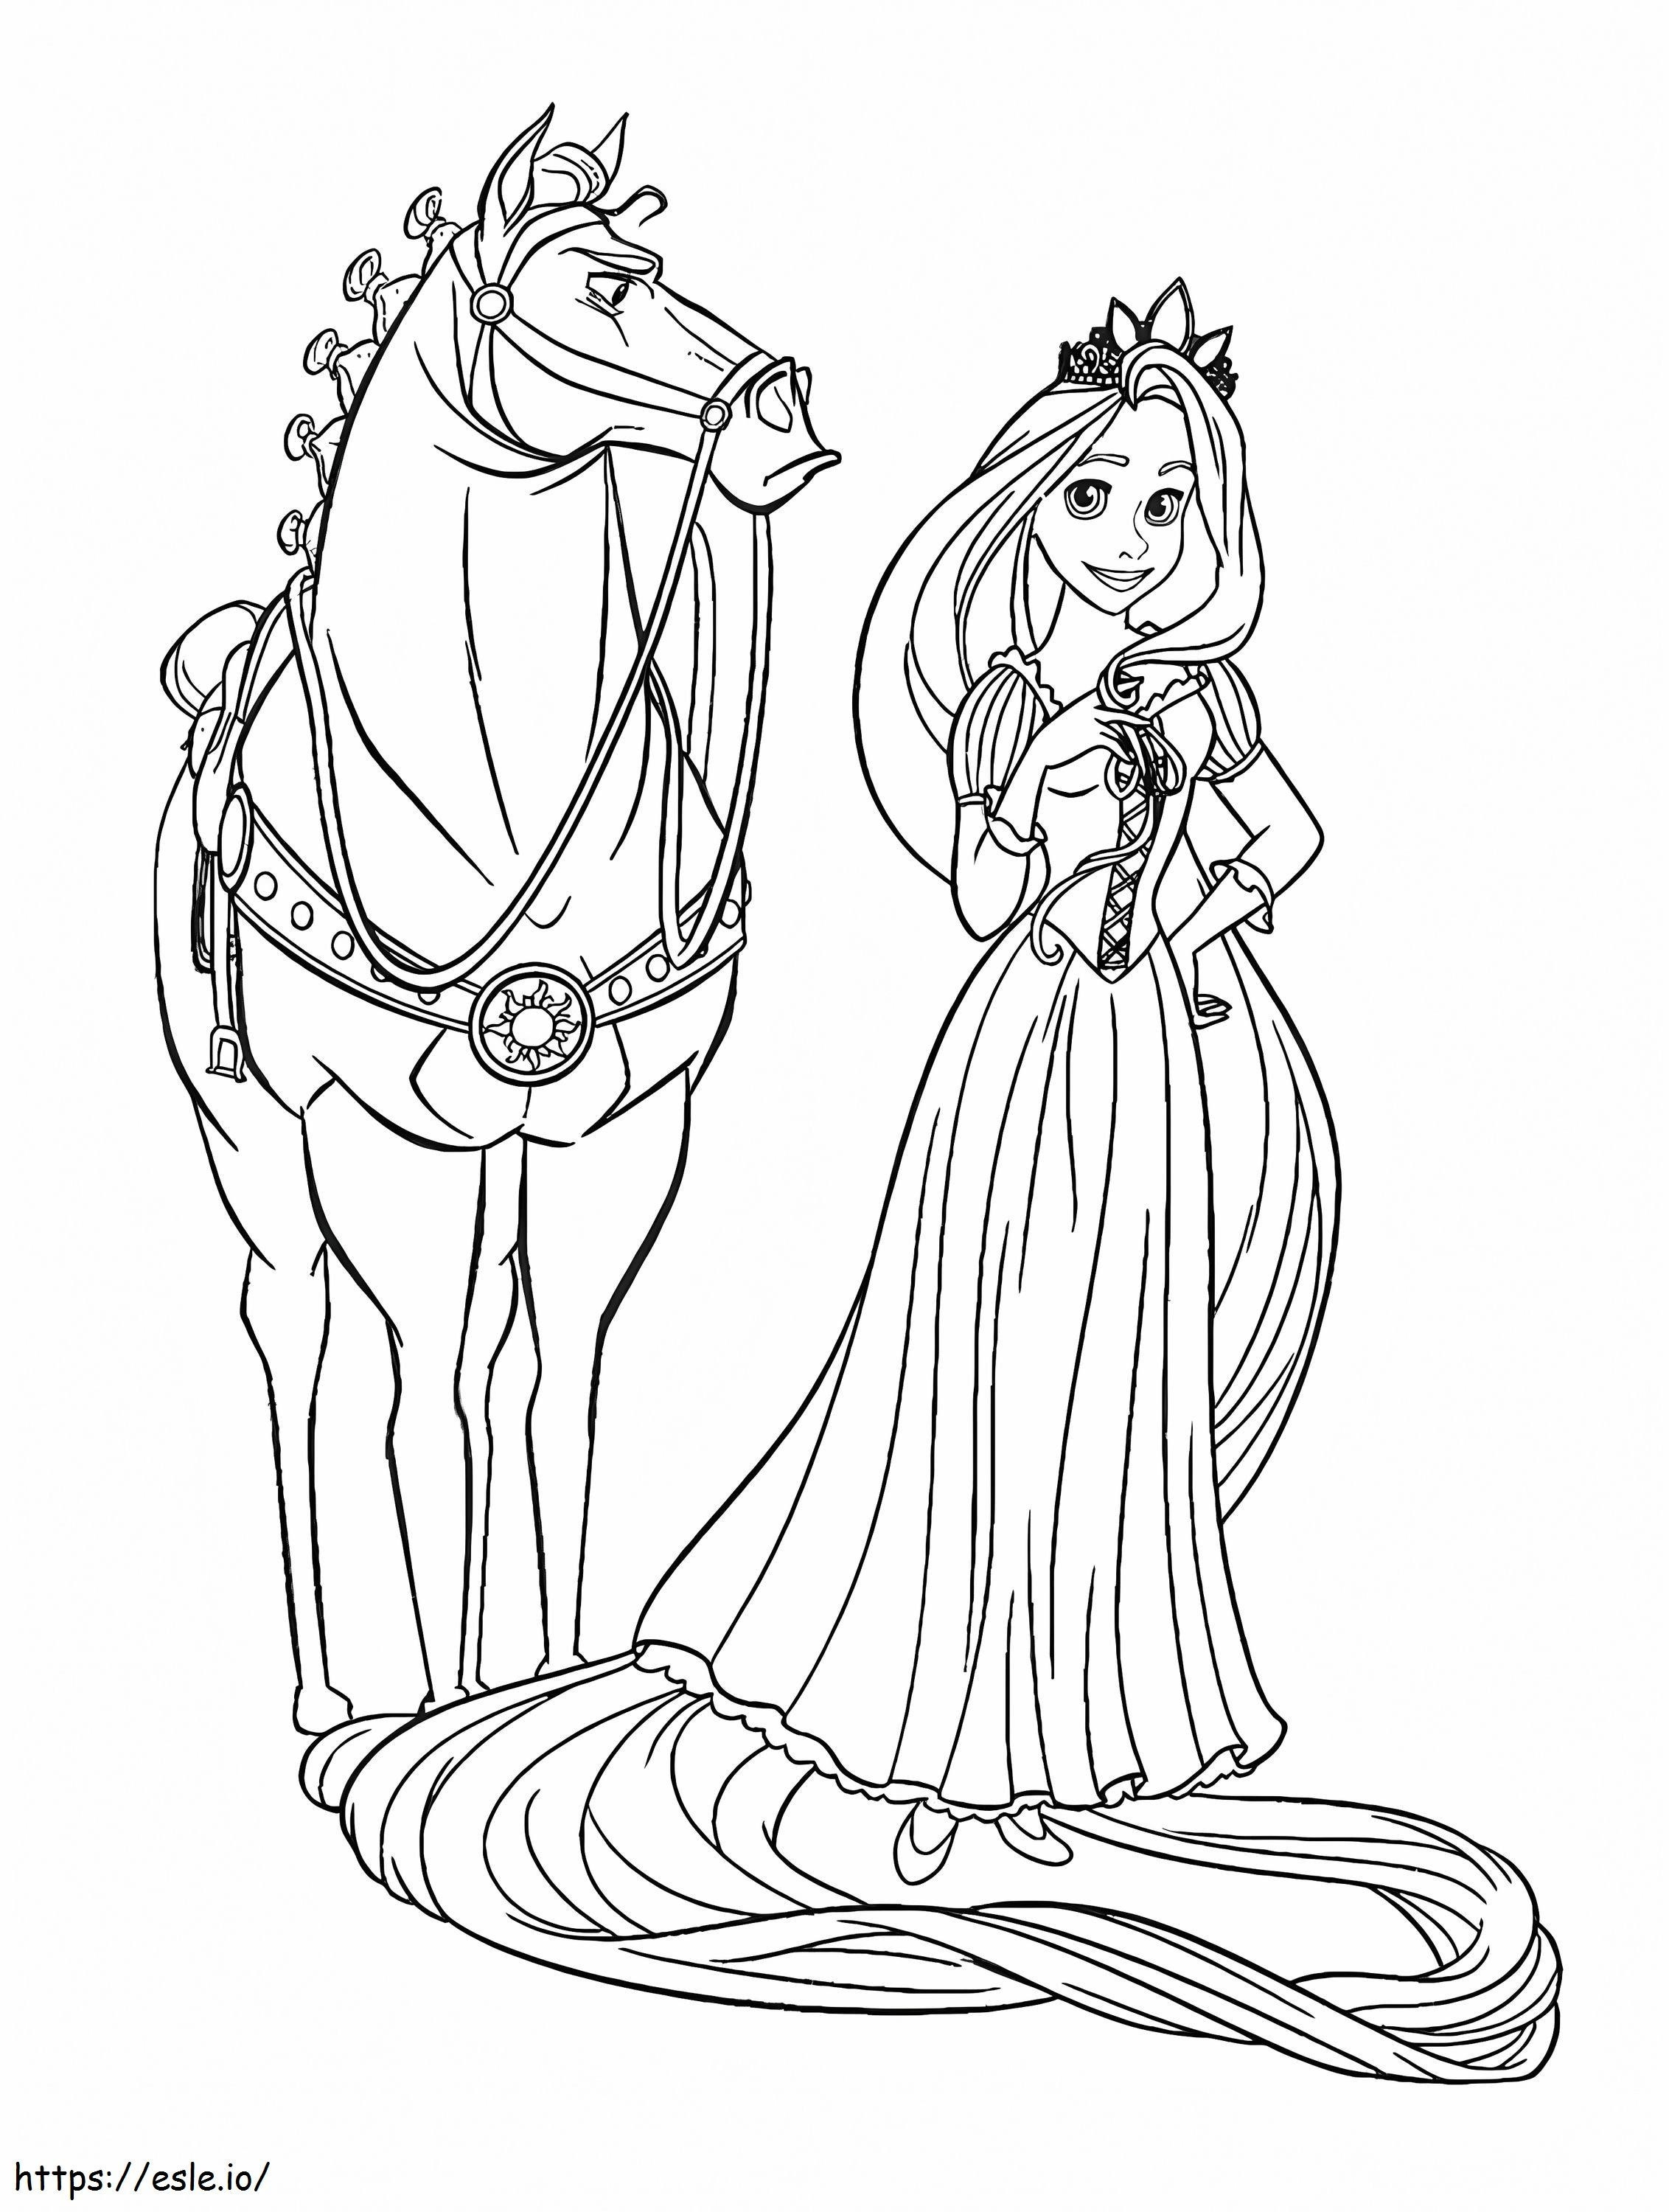 Princess Rapunzel And Horse coloring page